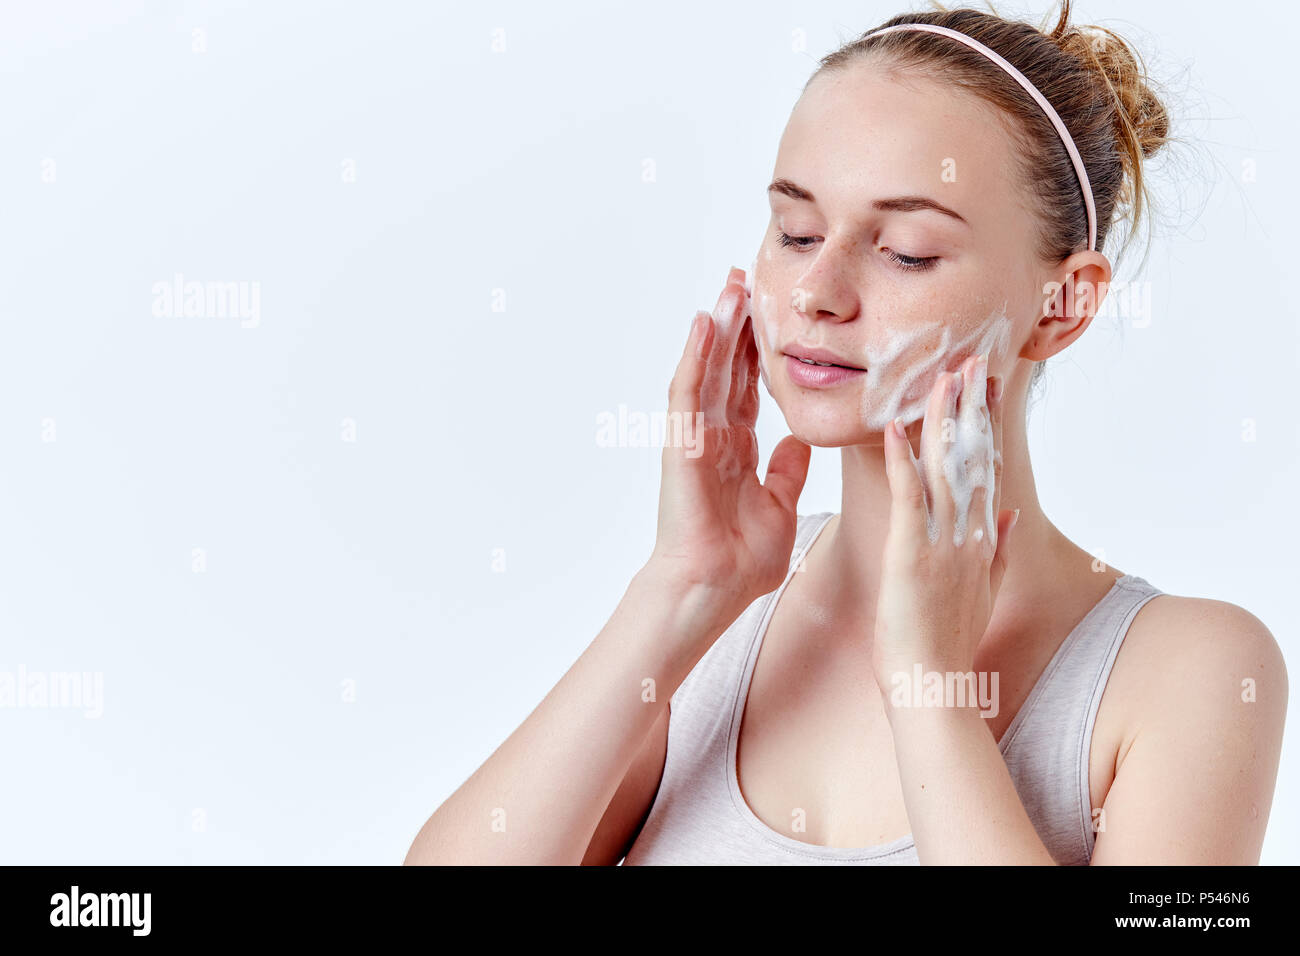 Teenager skincare. Beautiful teenage girl with freckles and blue eyes using foaming cleanser. Face washing concept isolated on white background. Stock Photo